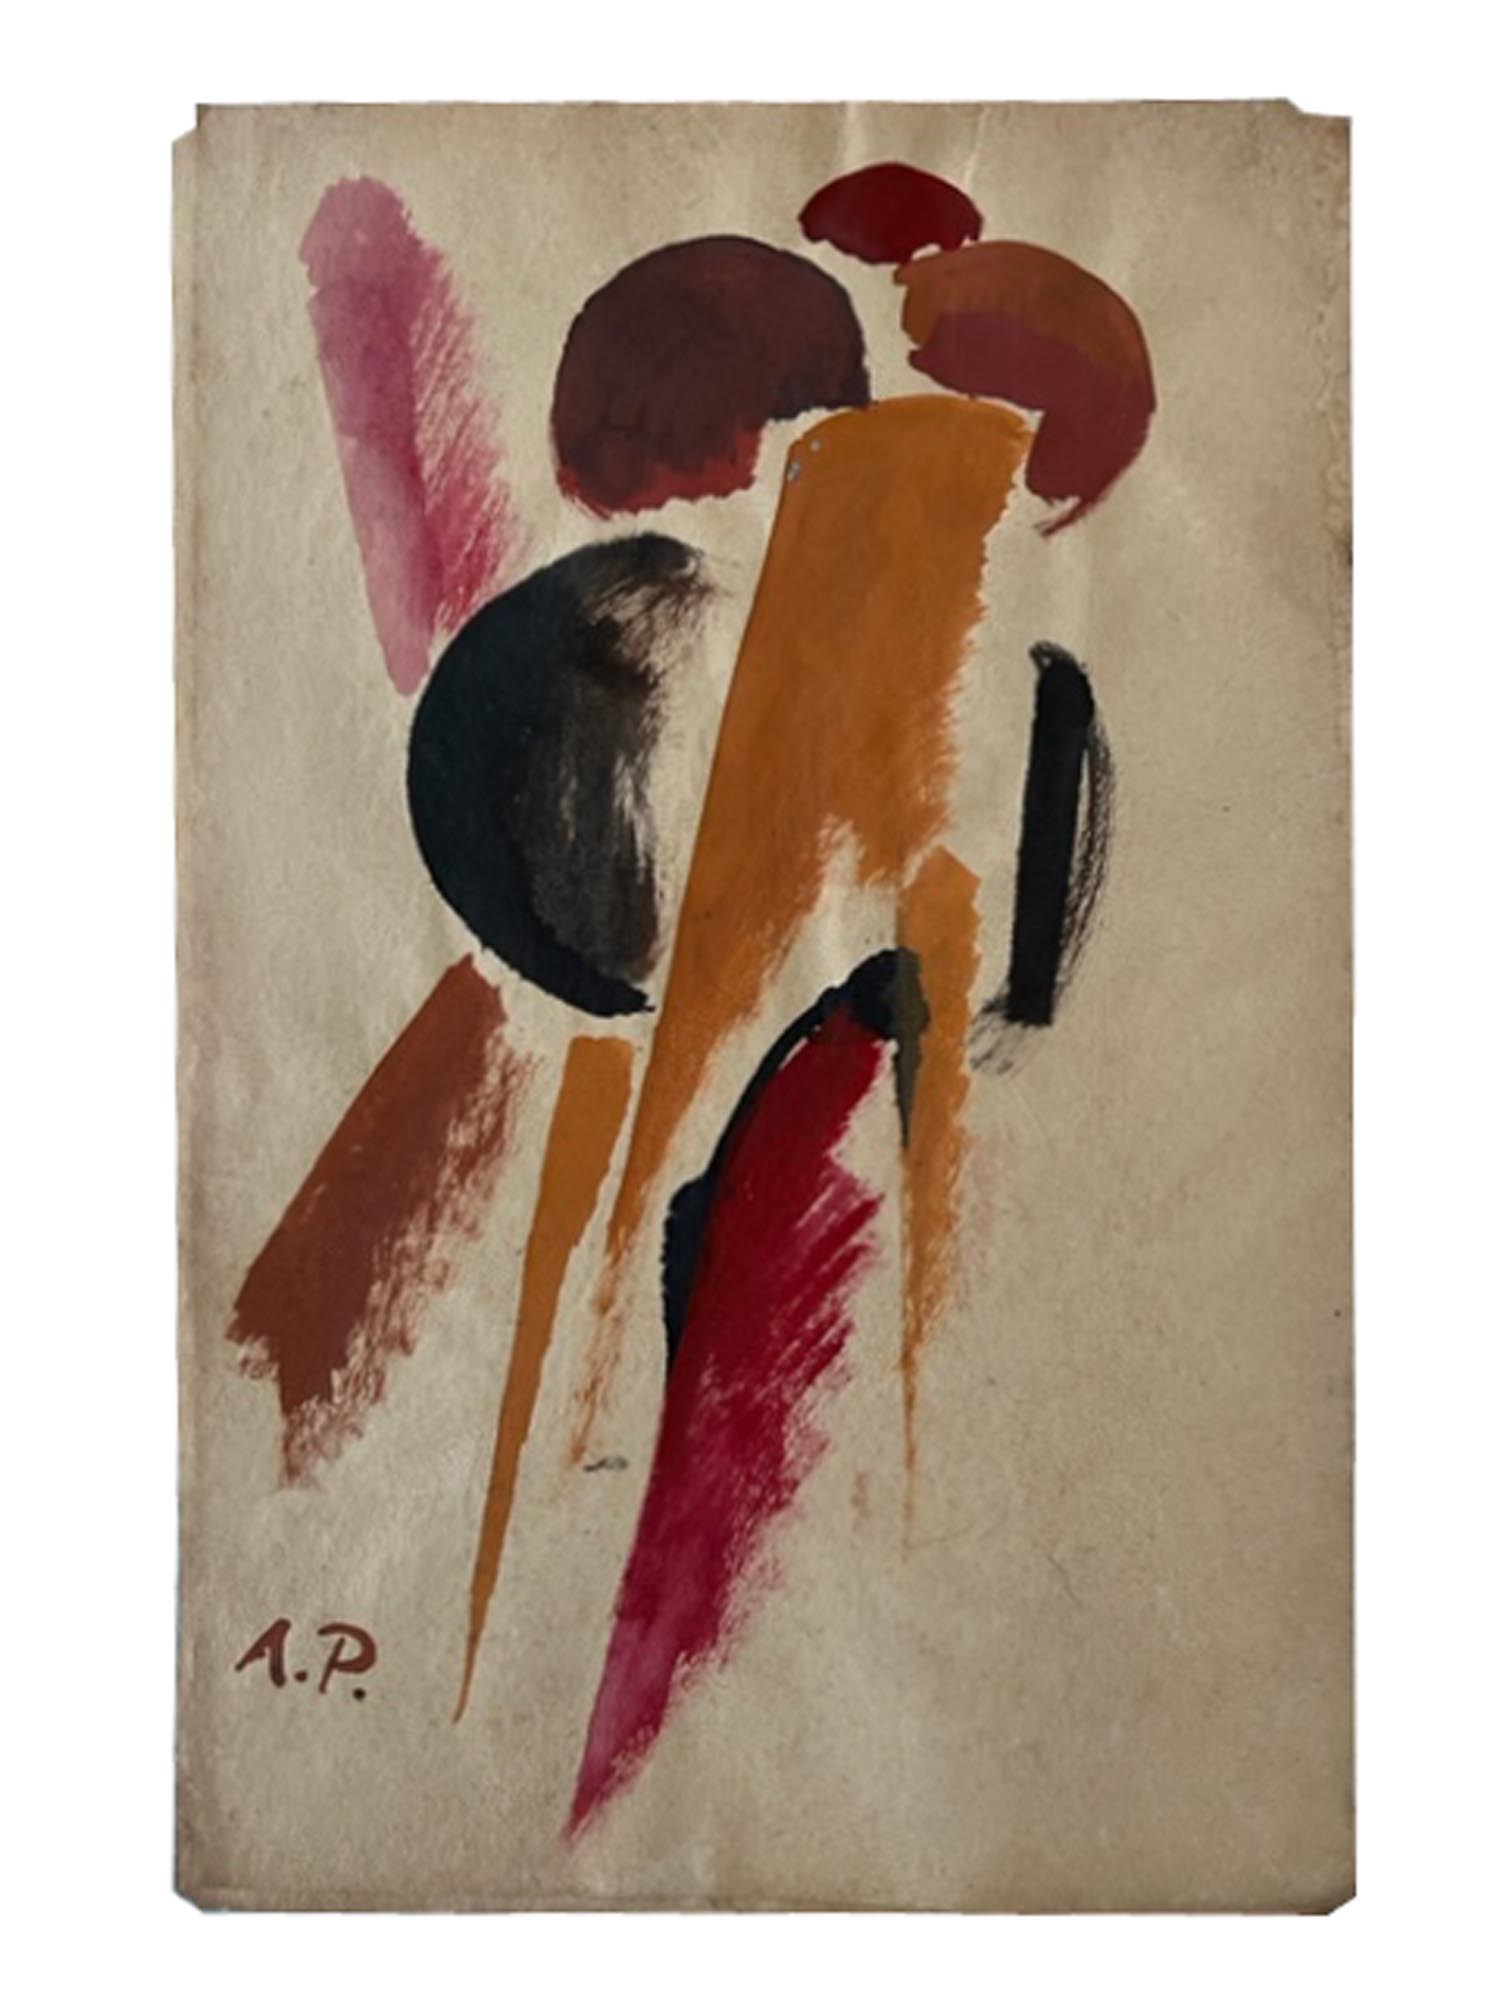 RUSSIAN ABSTRACT PAINTING ATTR. TO A. RODCHENKO PIC-0